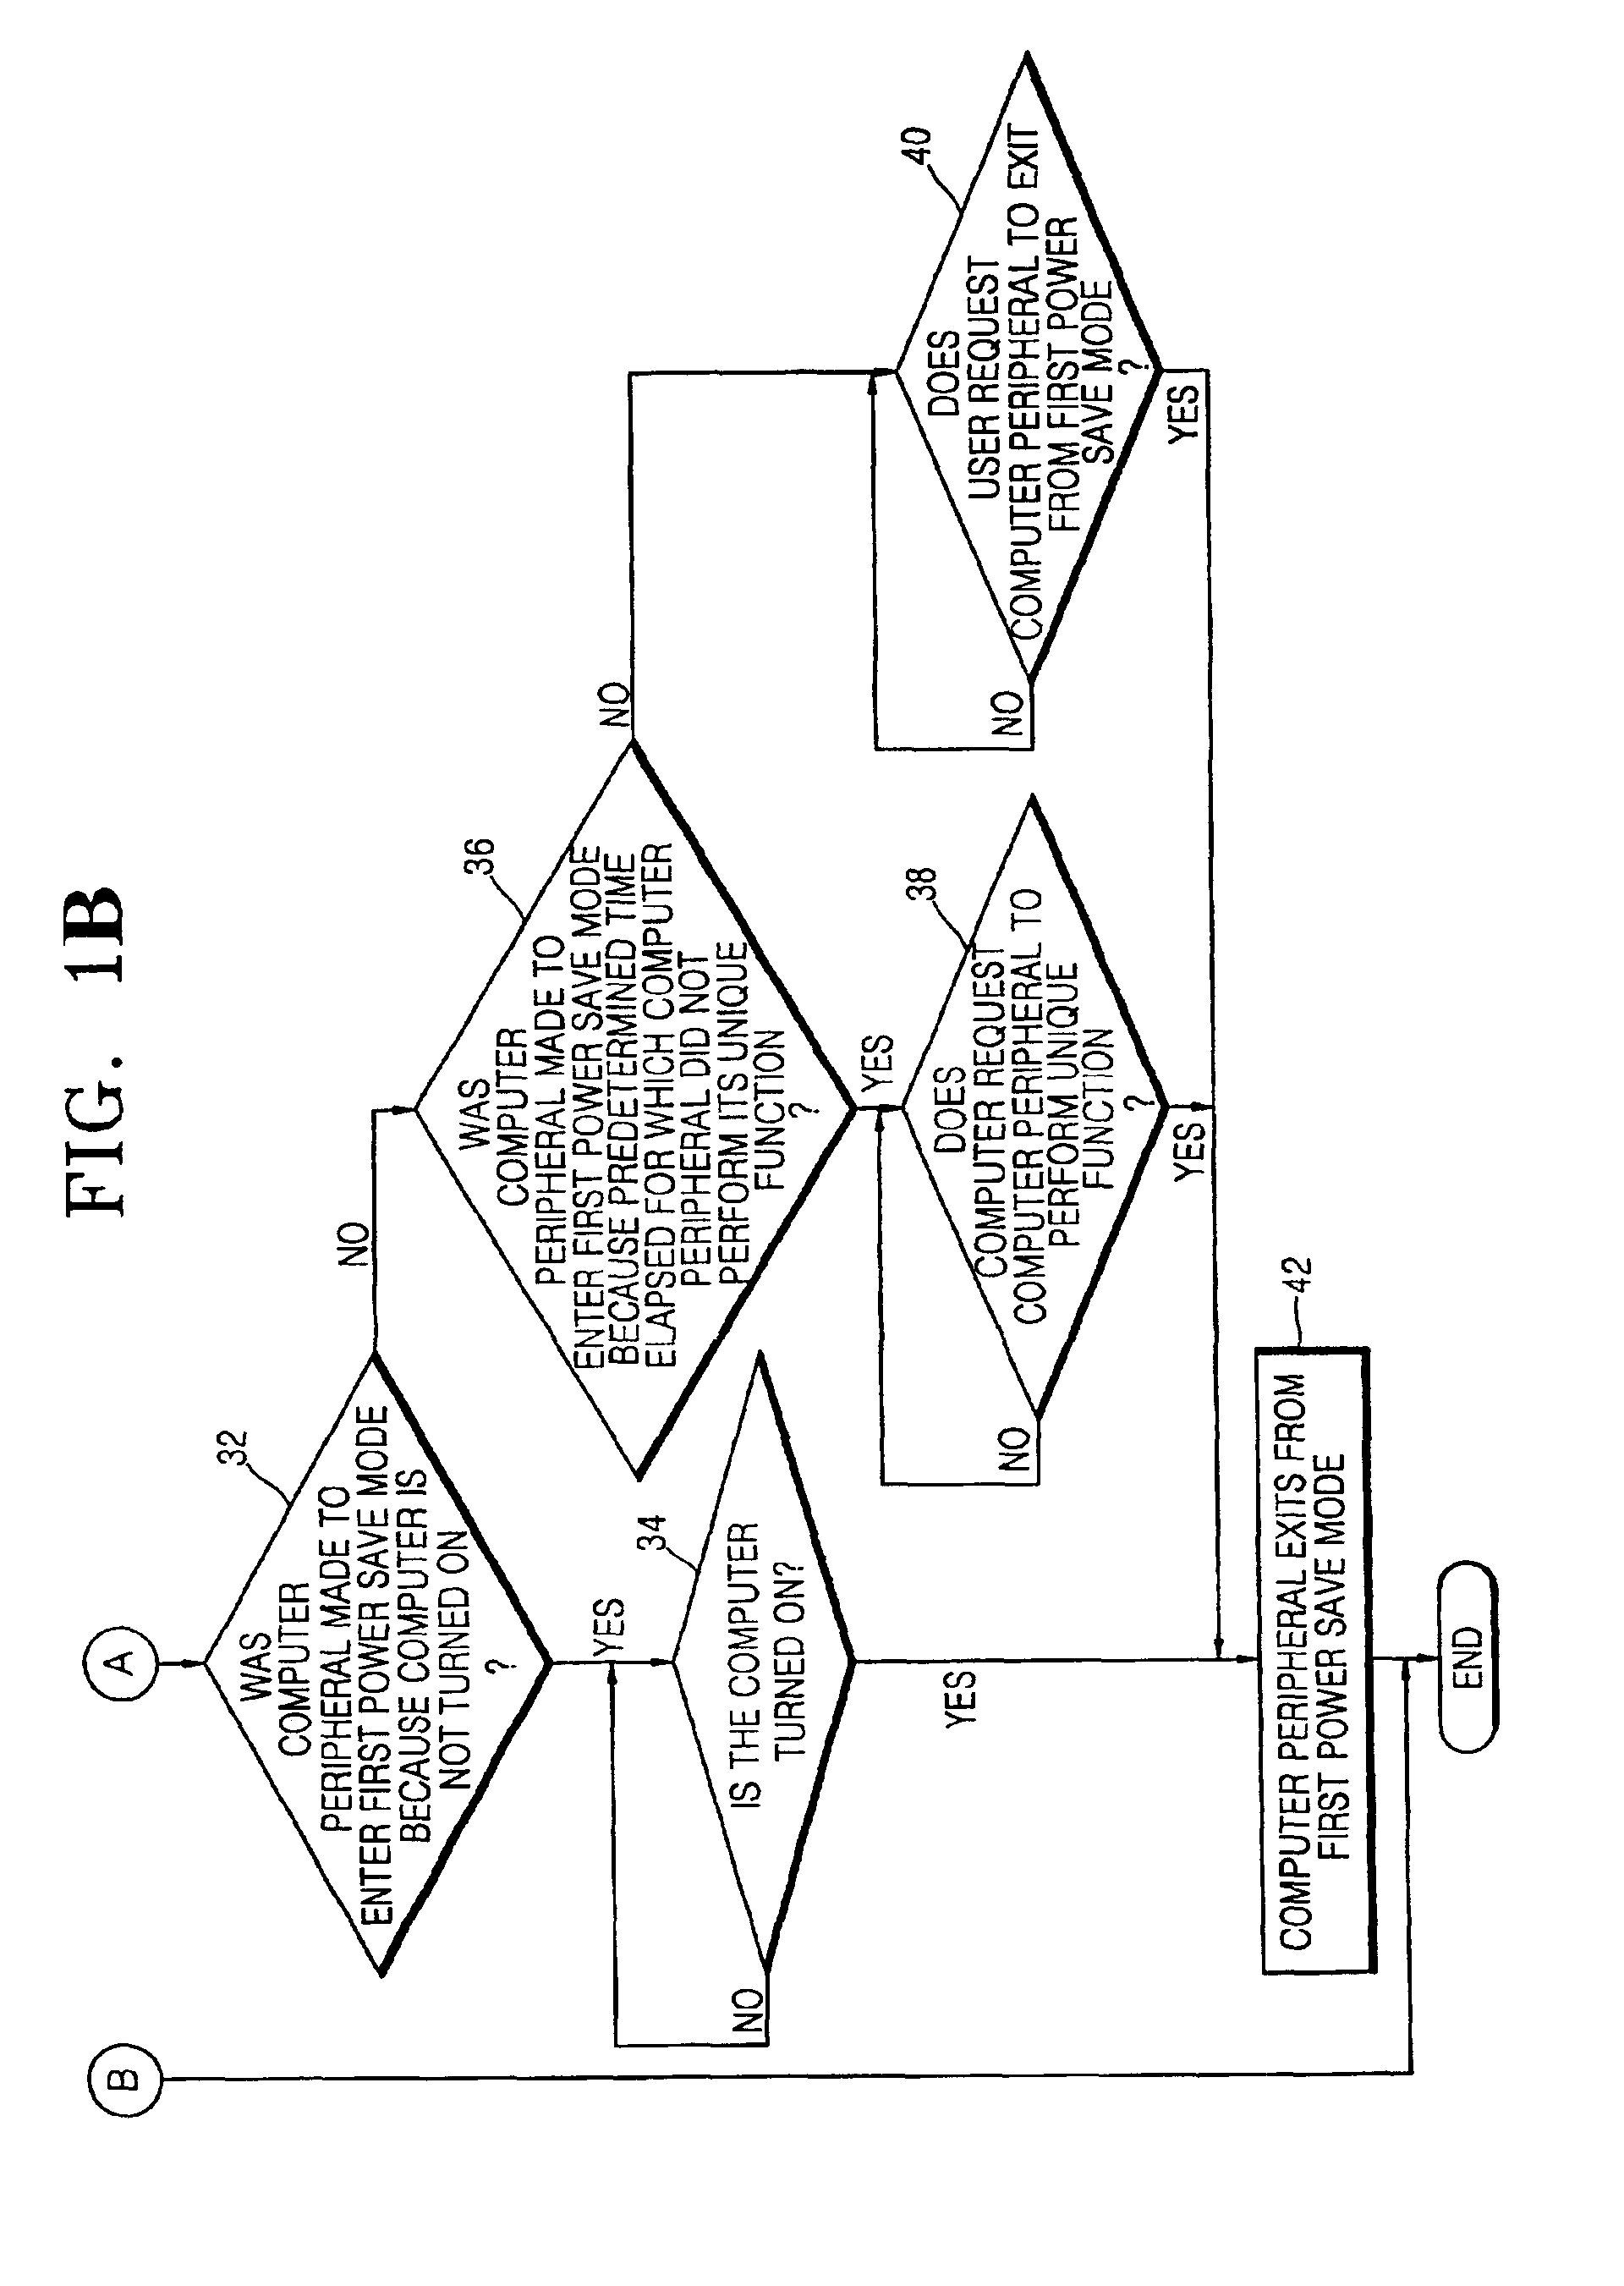 Low power consumption computer peripheral device and method for reducing power consumption